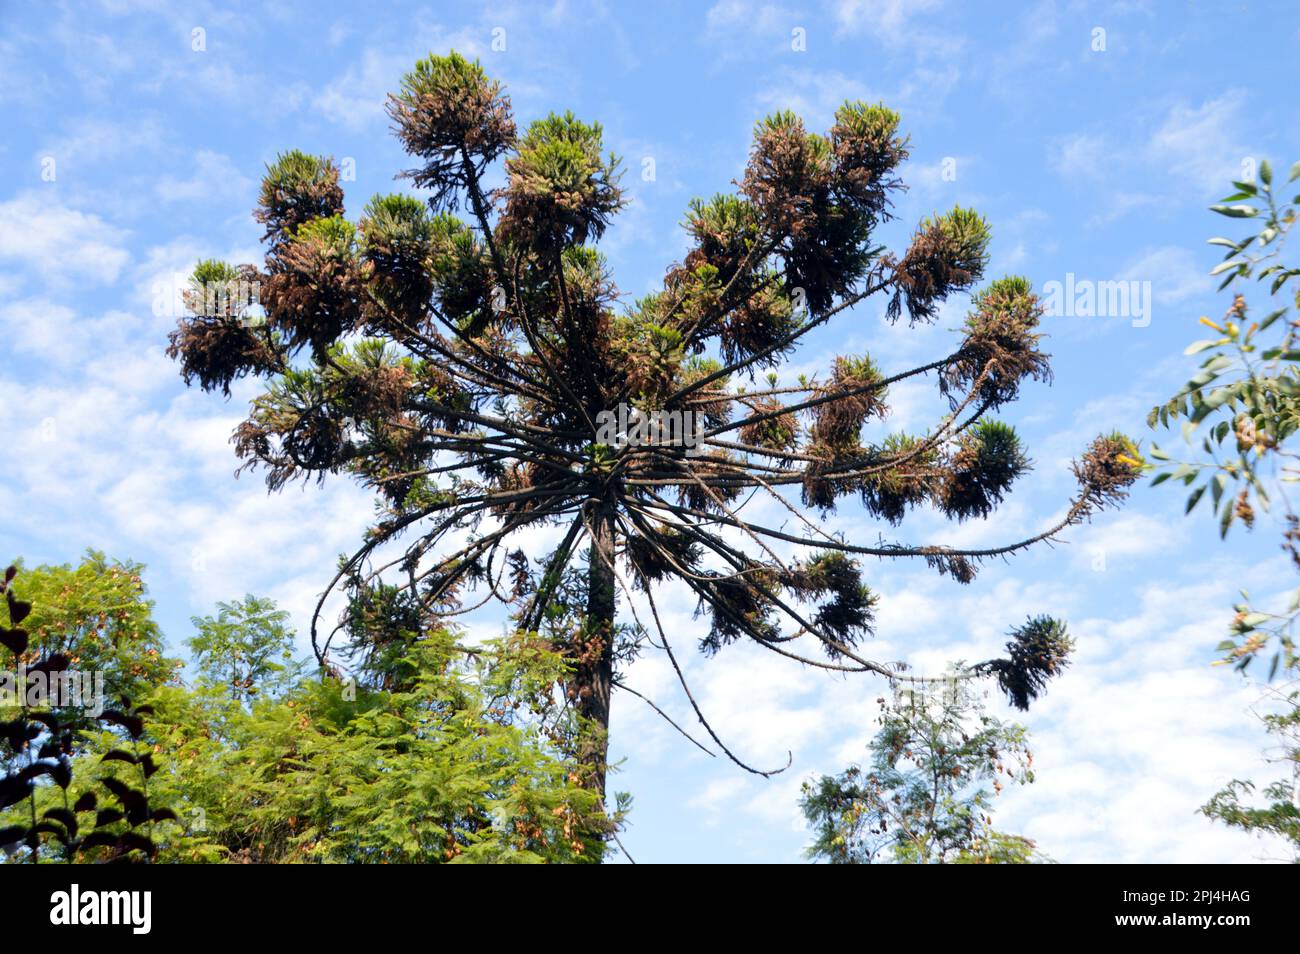 Chile. Santiago, Santa Lucia Hill:  Araucaria angustifolia, an evergreen coniferous tree  belonginging to the family Araucariaceae which has 19 member Stock Photo